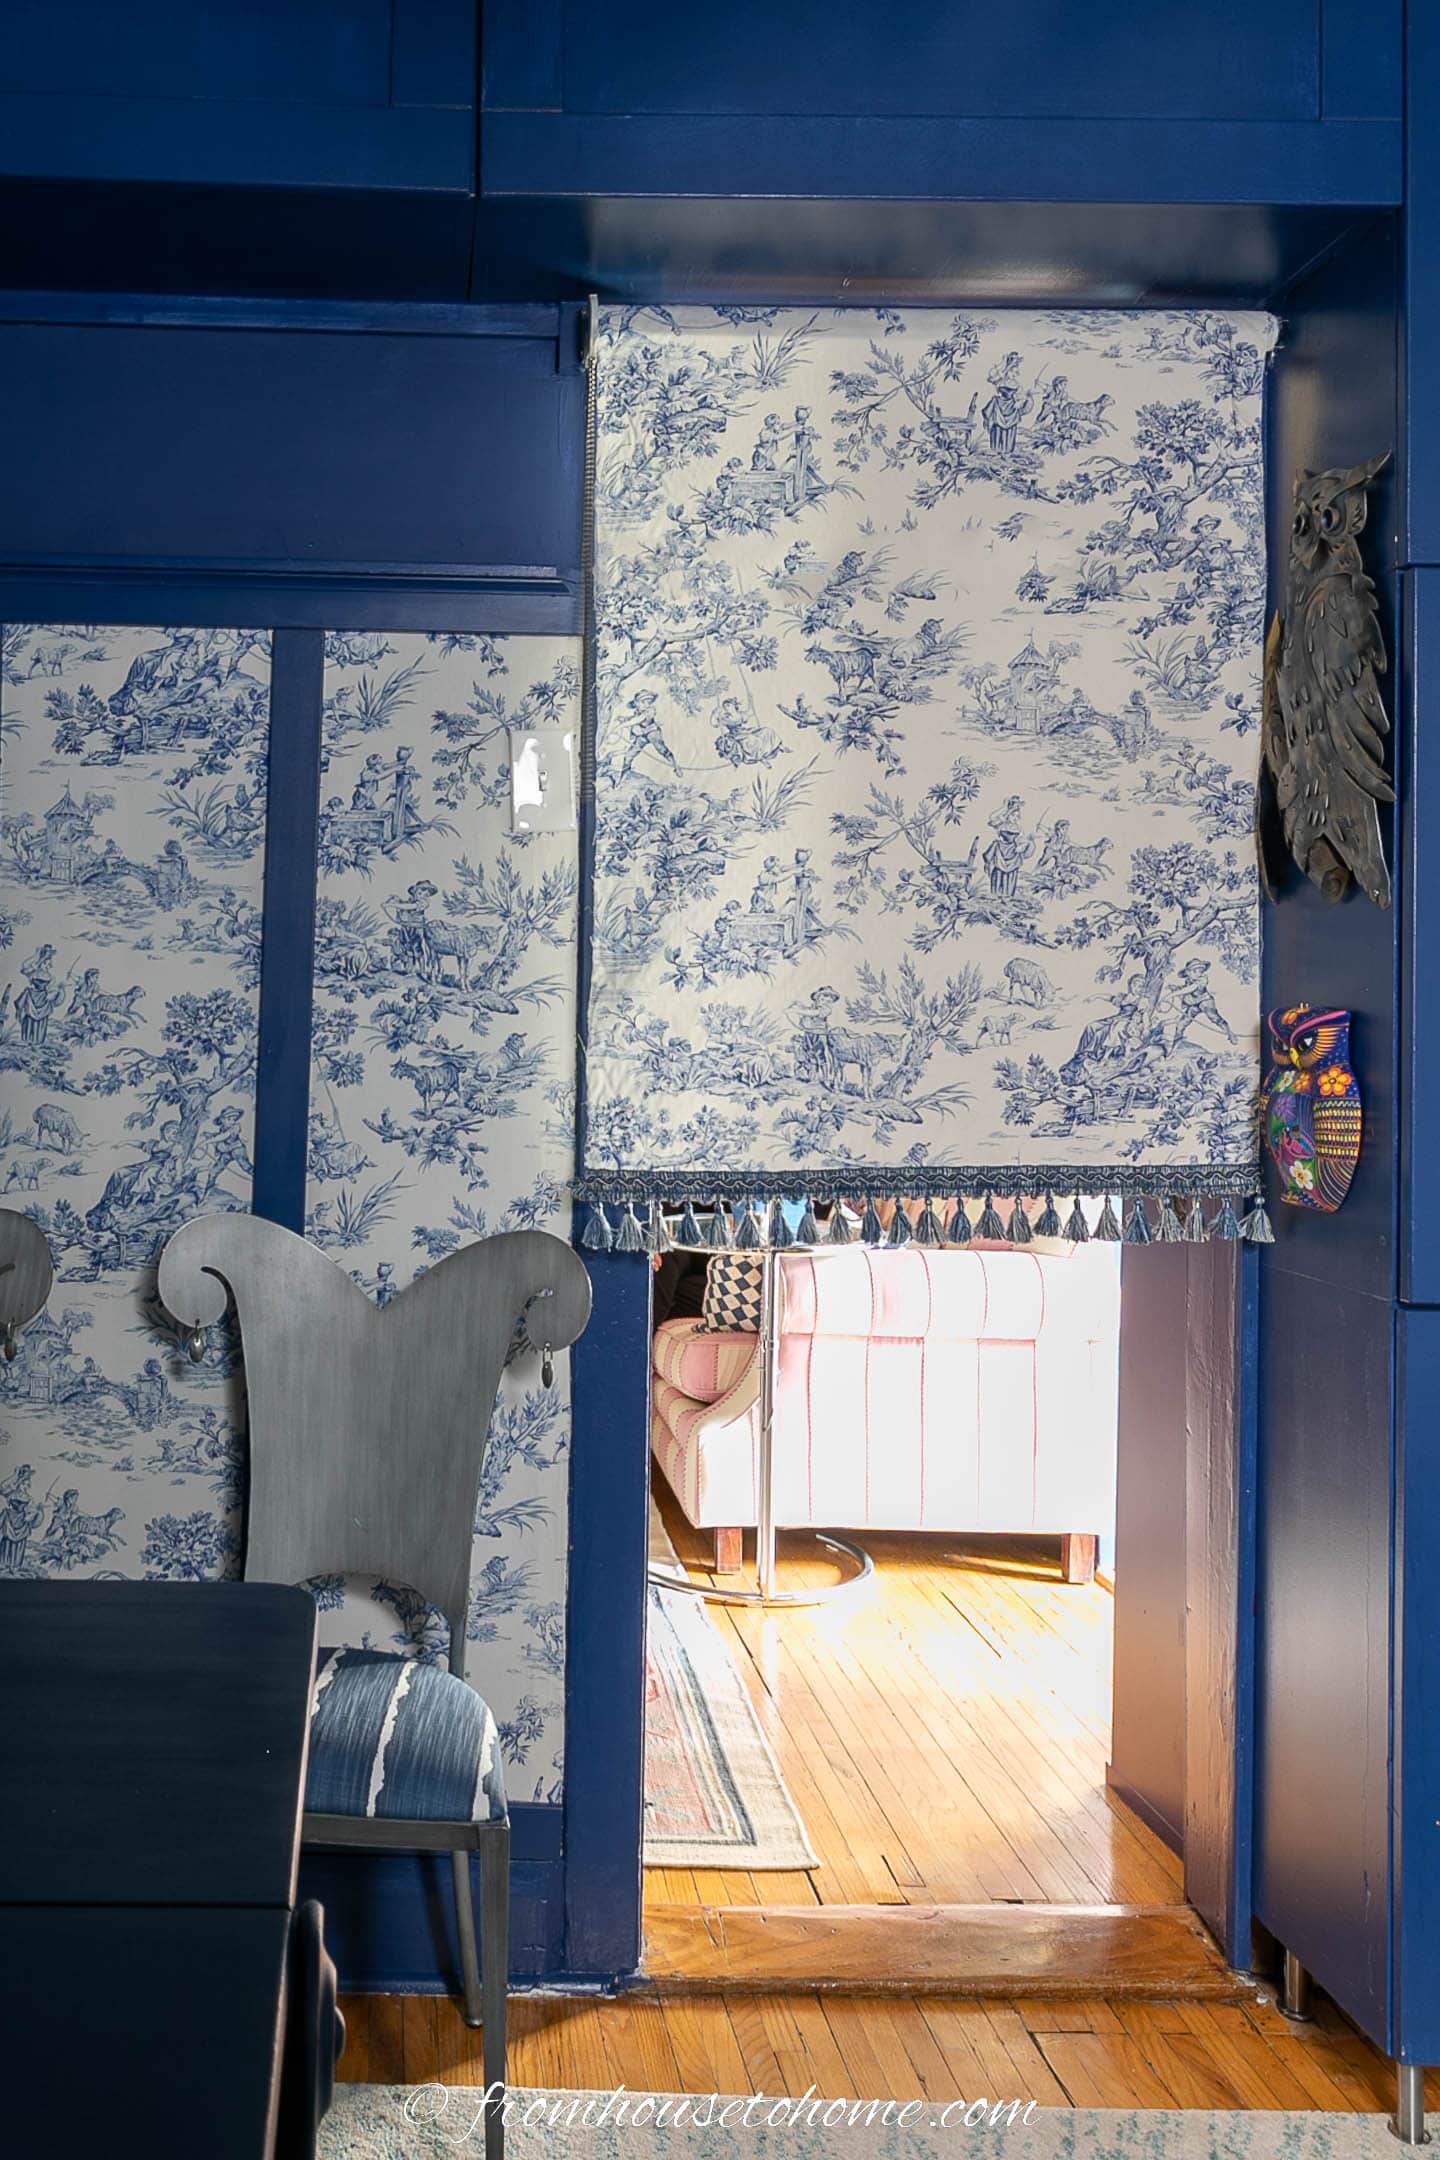 The home office door partly covered by a blue and white toile roller blind